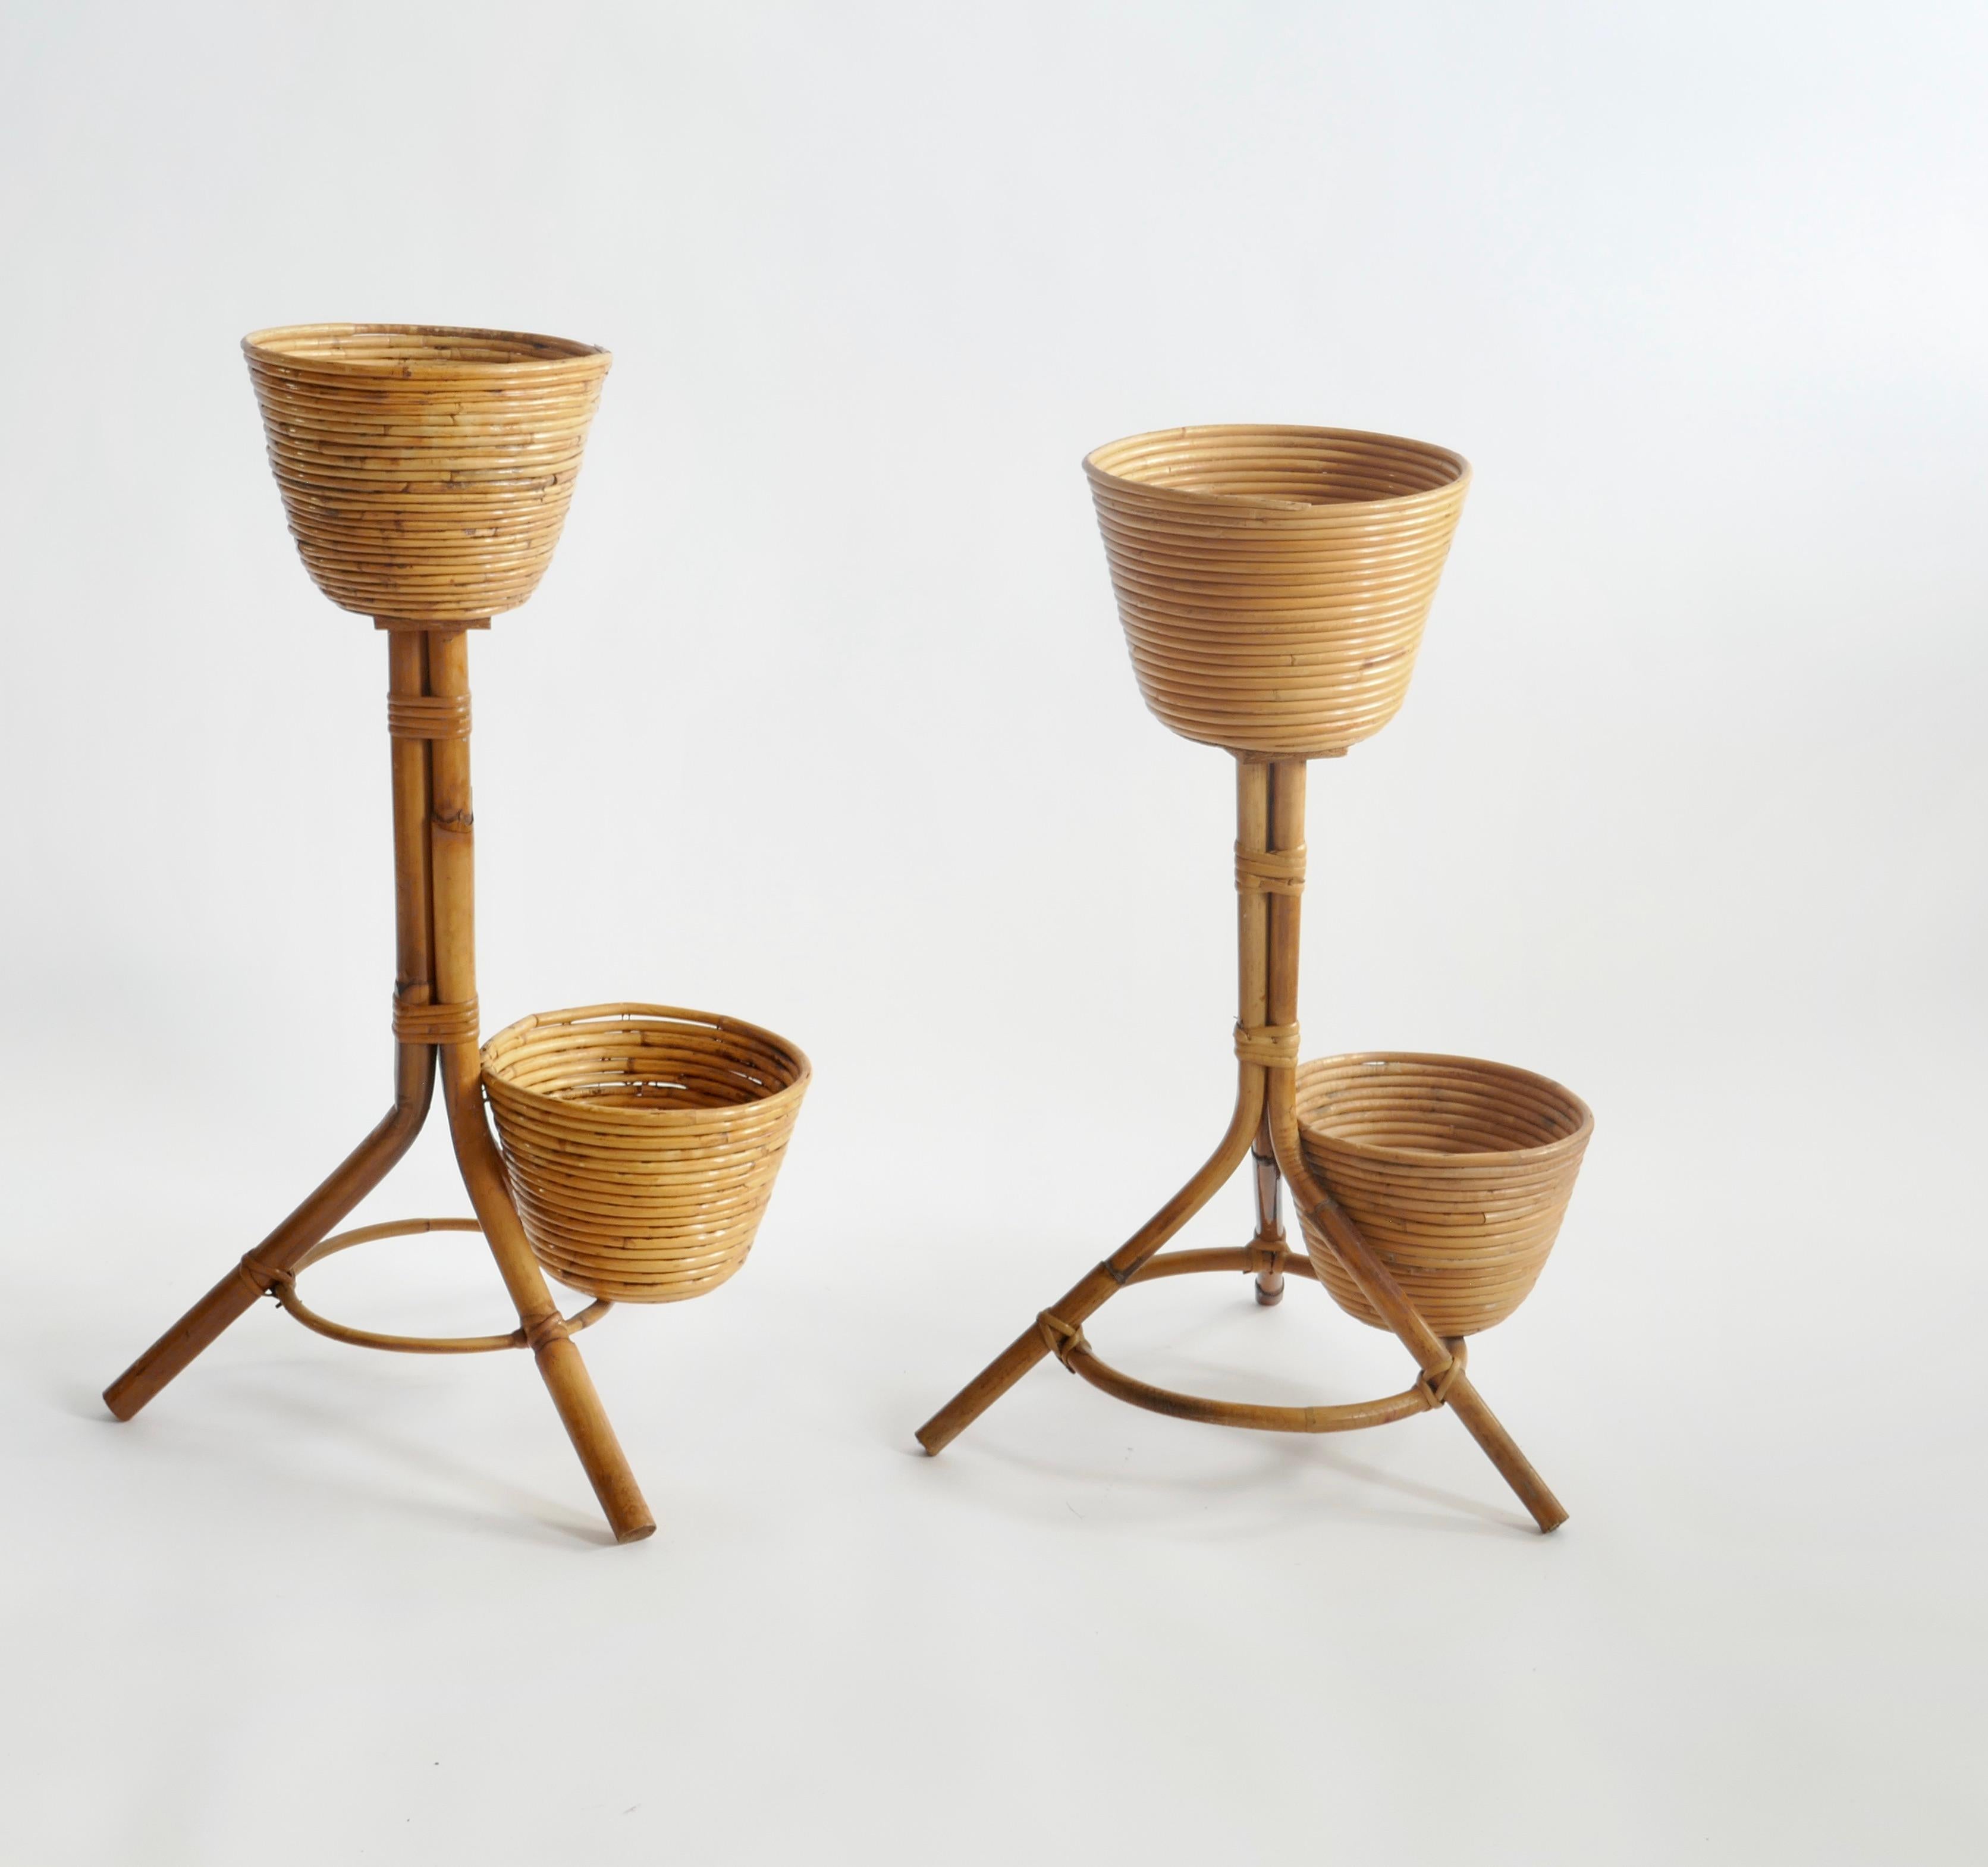 Mid-20th Century Set of 2 Bamboo and Rattan Plant Holders, Italy 1950s For Sale